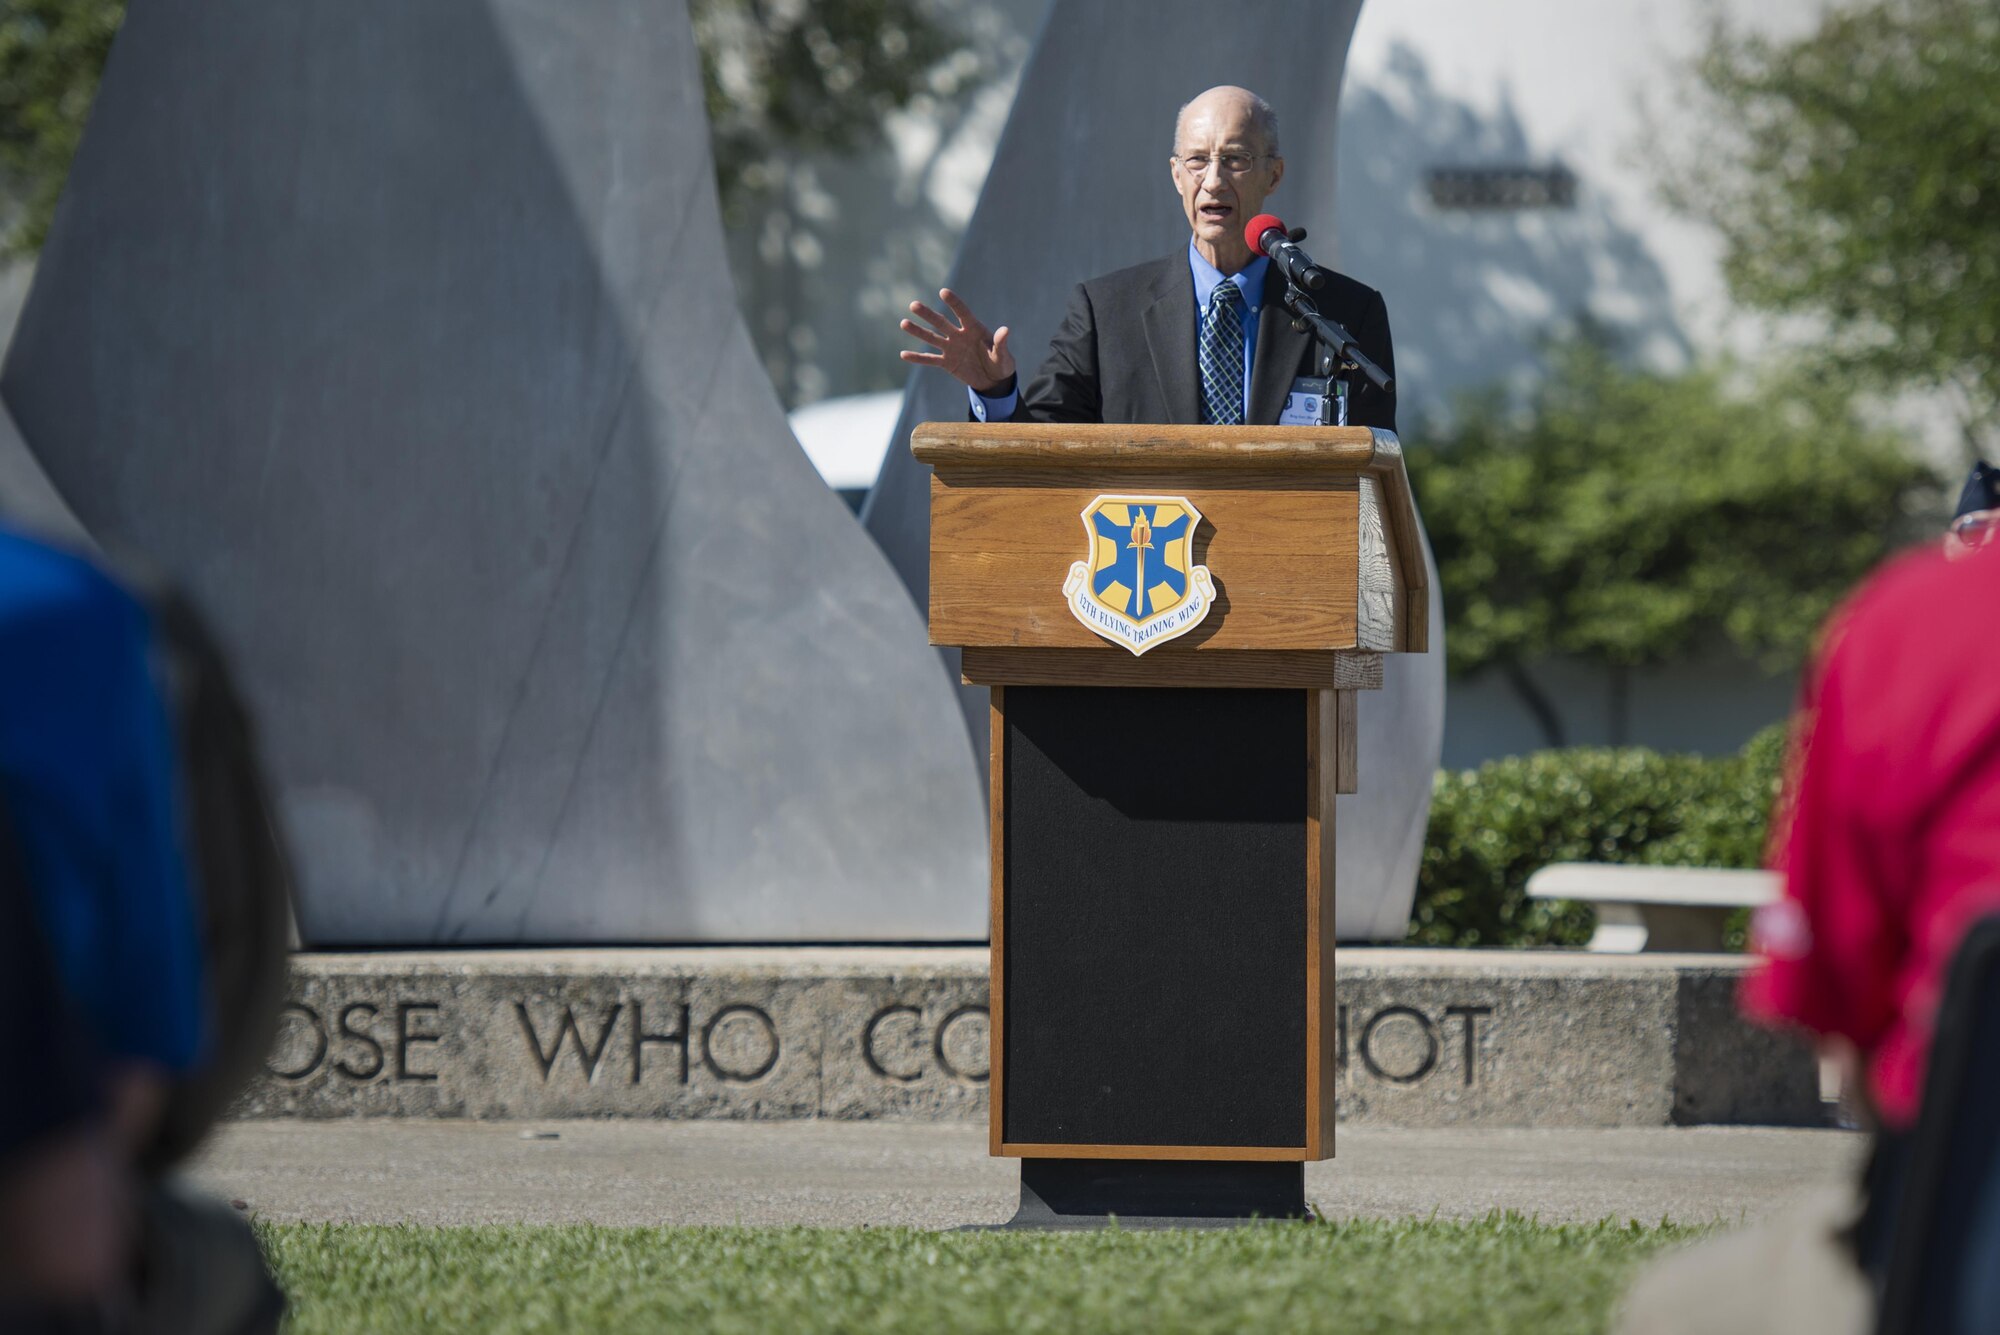 Retired U.S. Army Brig. Gen. John Rose, speaks during the Freedom Flyer Reunion wreath laying ceremony March 31, 2017, at Joint Base San Antonio-Randolph, Texas. The event honors all prisoners of war and missing in action service members from the Vietnam War and included a wreath-laying ceremony and a missing man formation flyover.  (U.S. Air Force photo by Sean M. Worrell) 